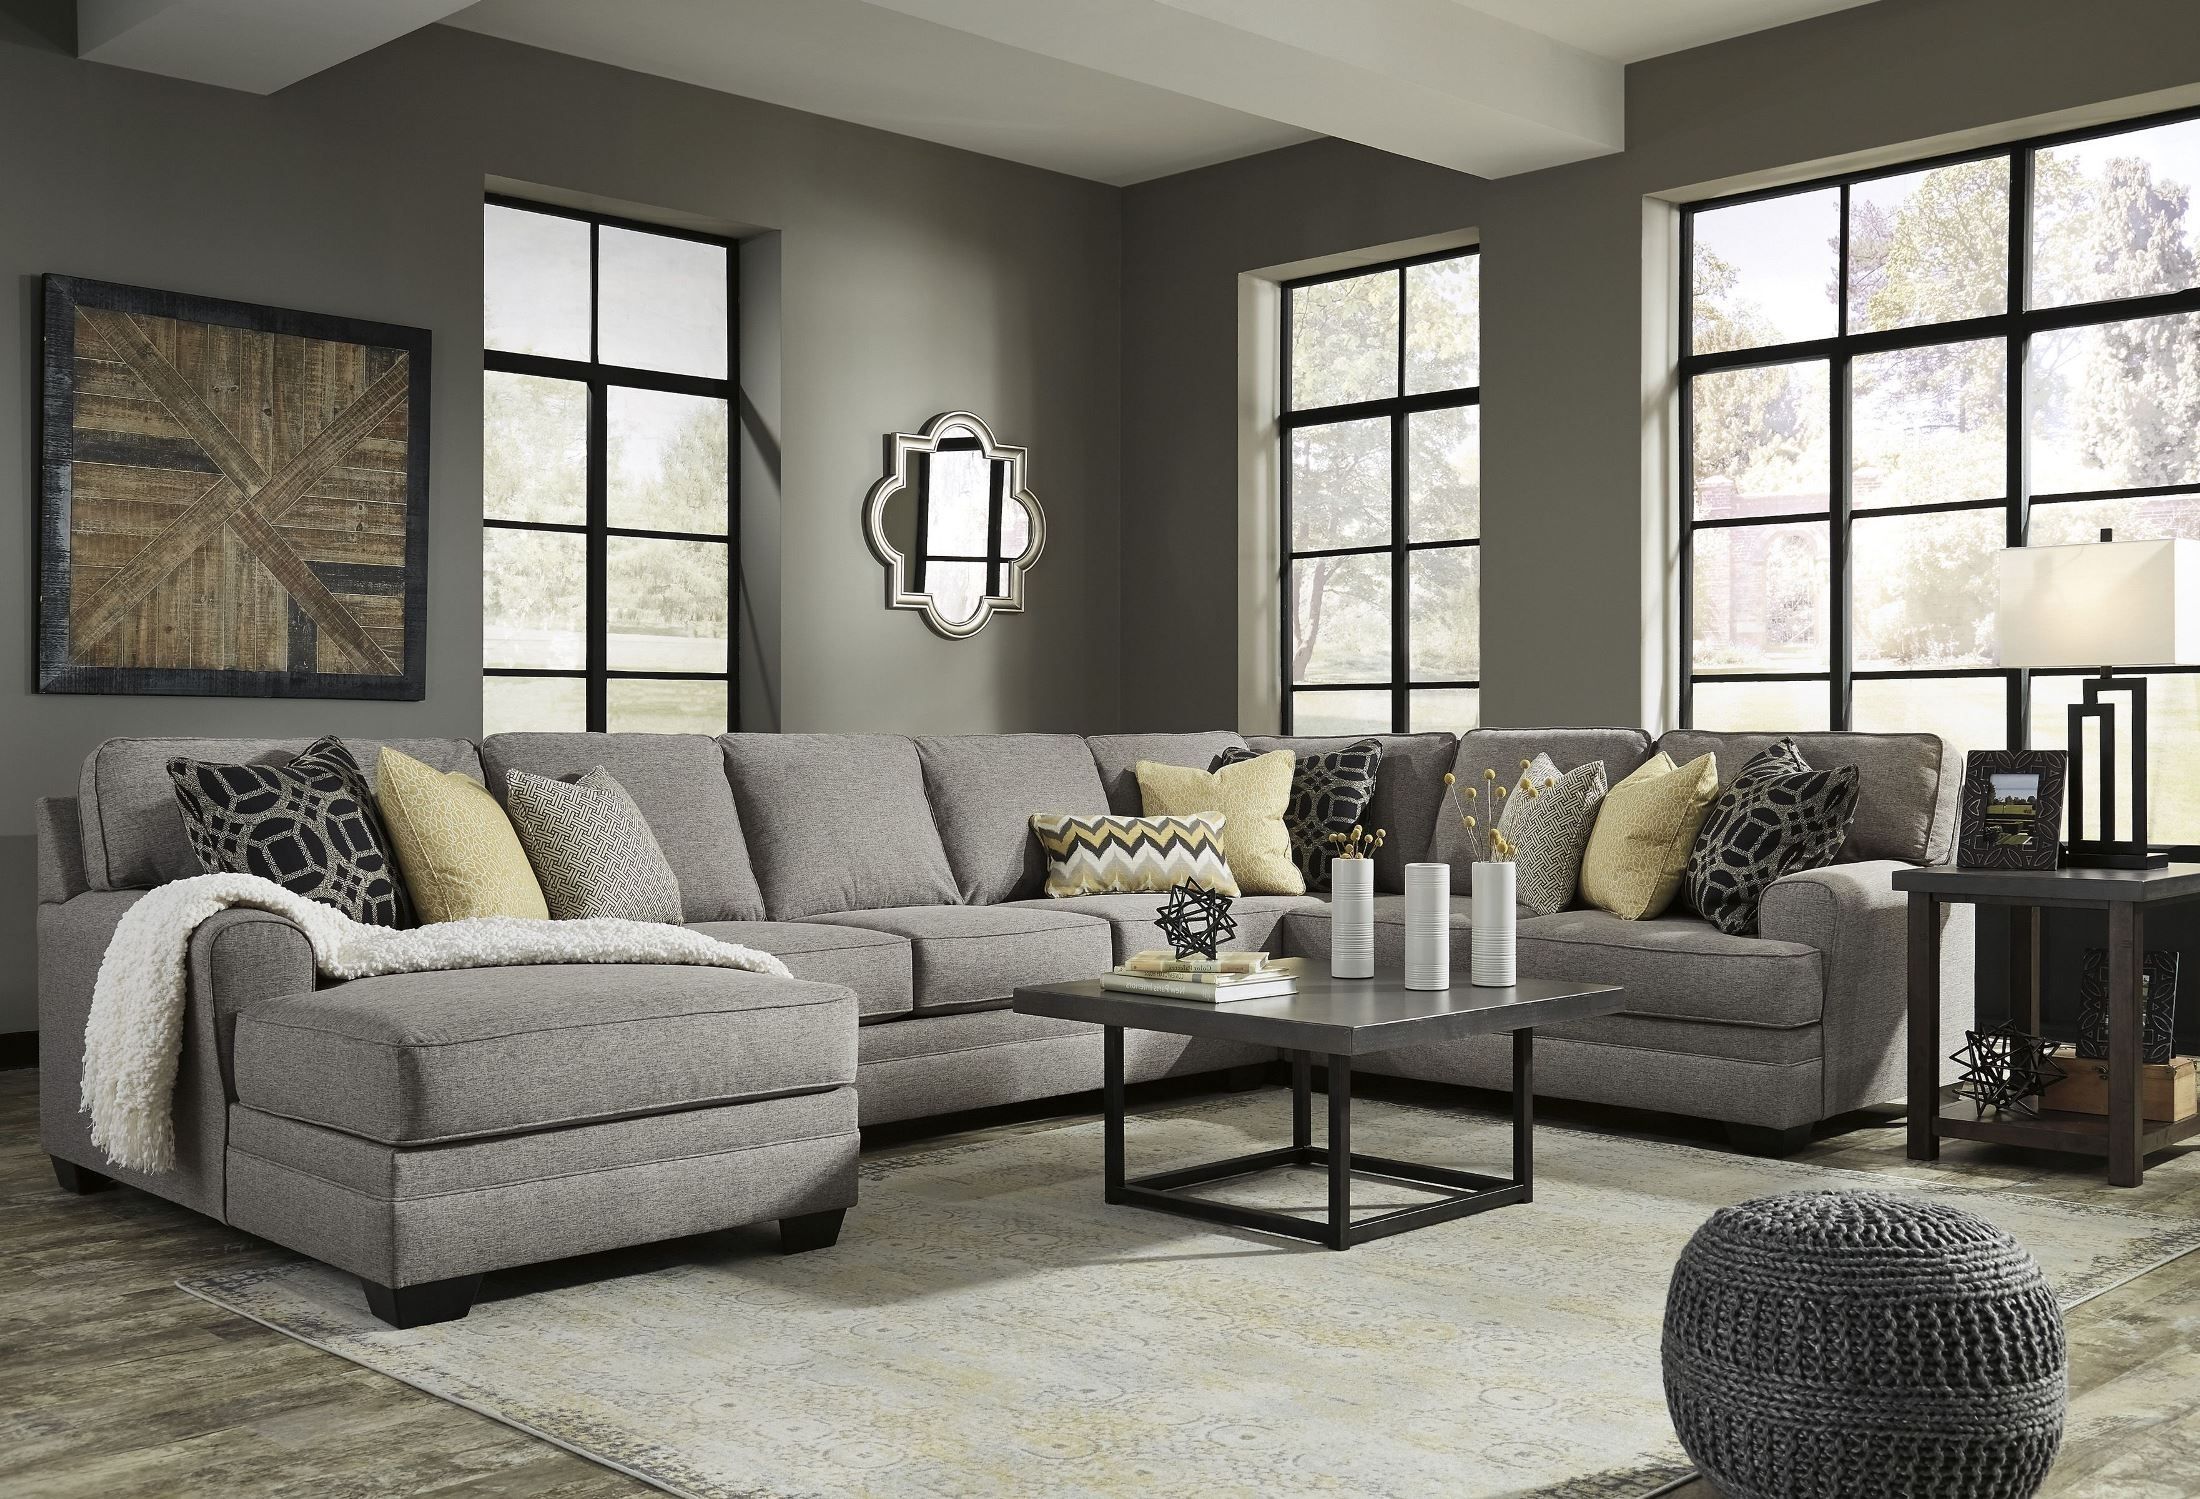 Large Chaise Sofas | Baci Living Room With Delano 2 Piece Sectionals With Laf Oversized Chaise (View 24 of 25)